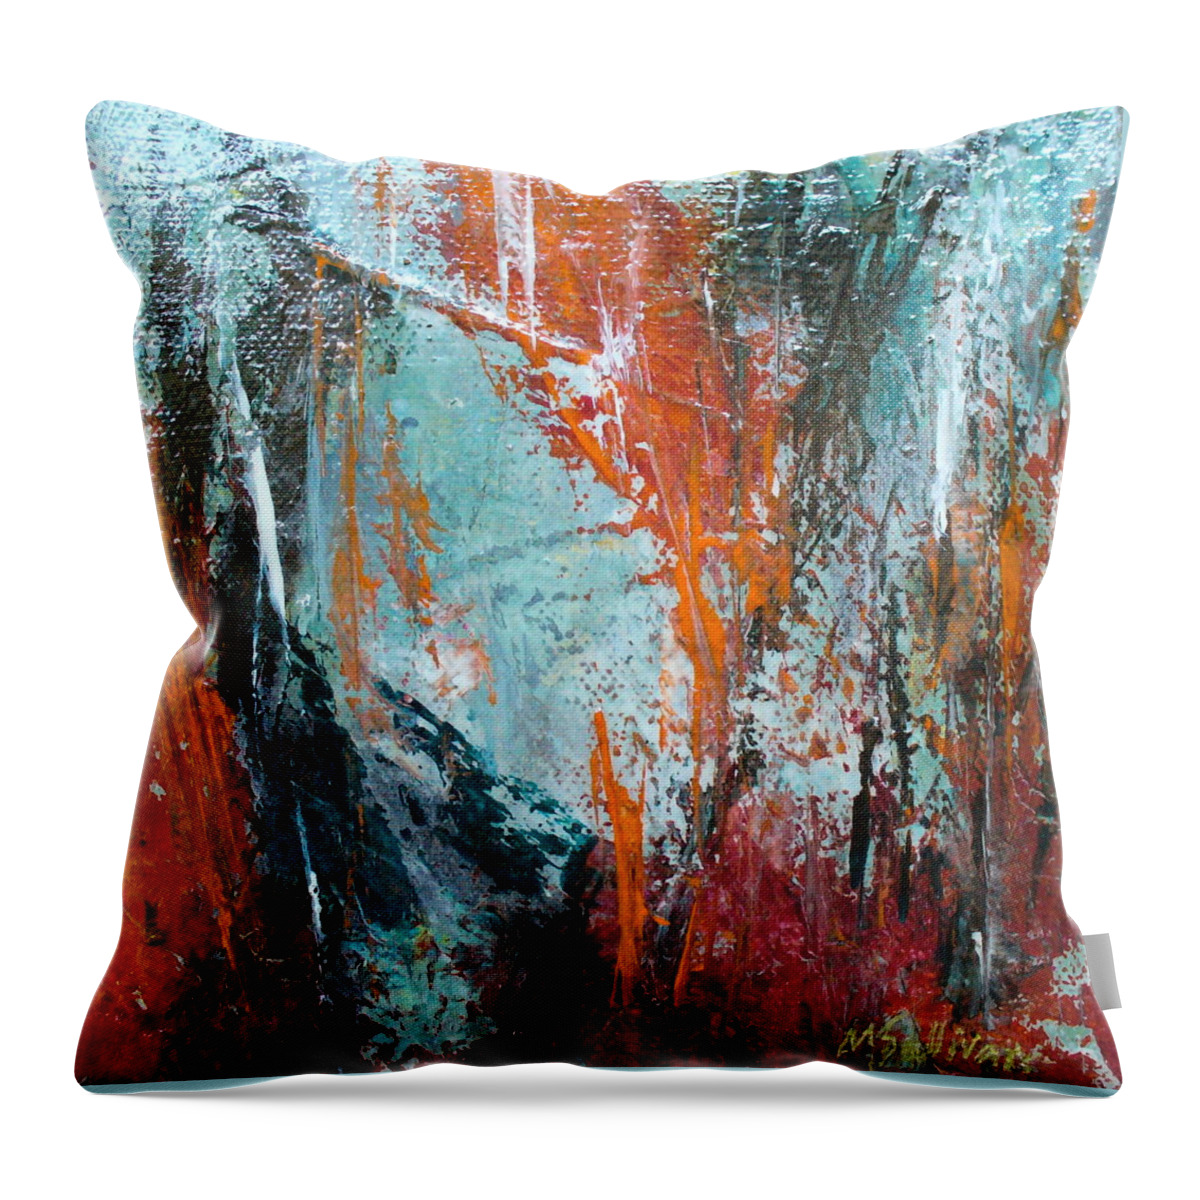 Contemporary Throw Pillow featuring the painting Gemini by Mary Sullivan